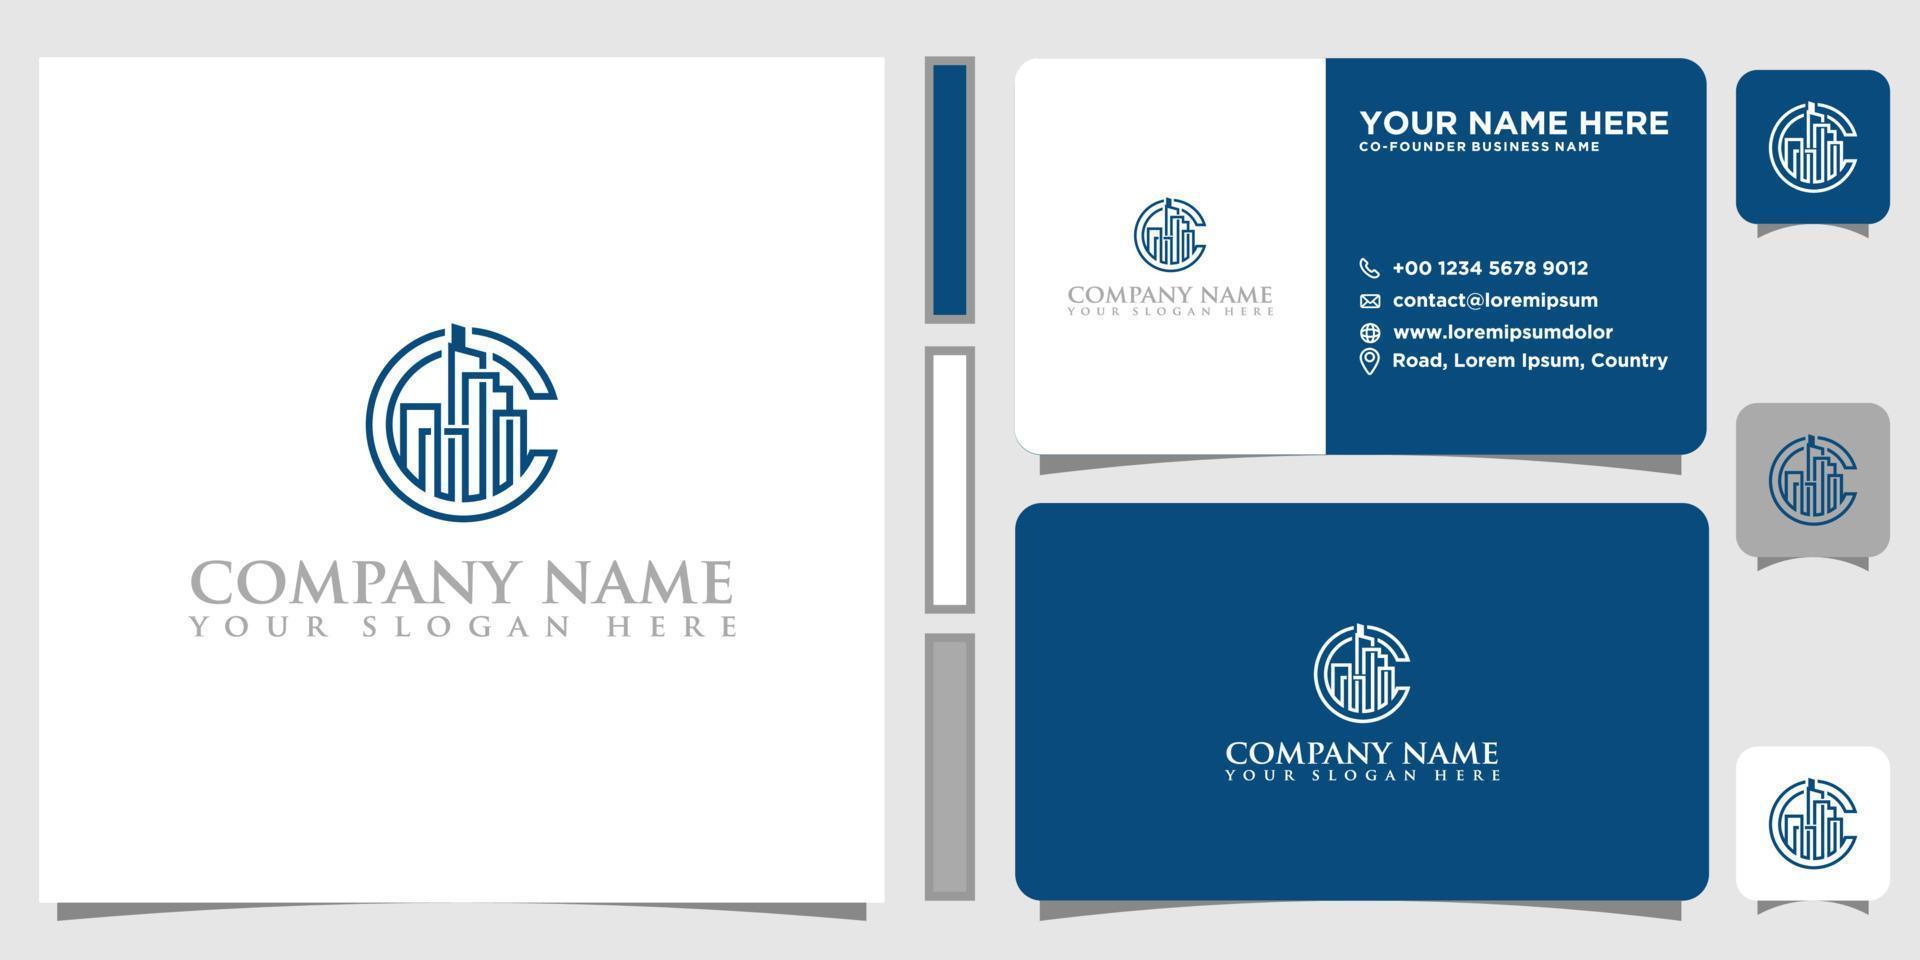 logo with line style and business card design. Building abstract logo for inspiration, illustration vector